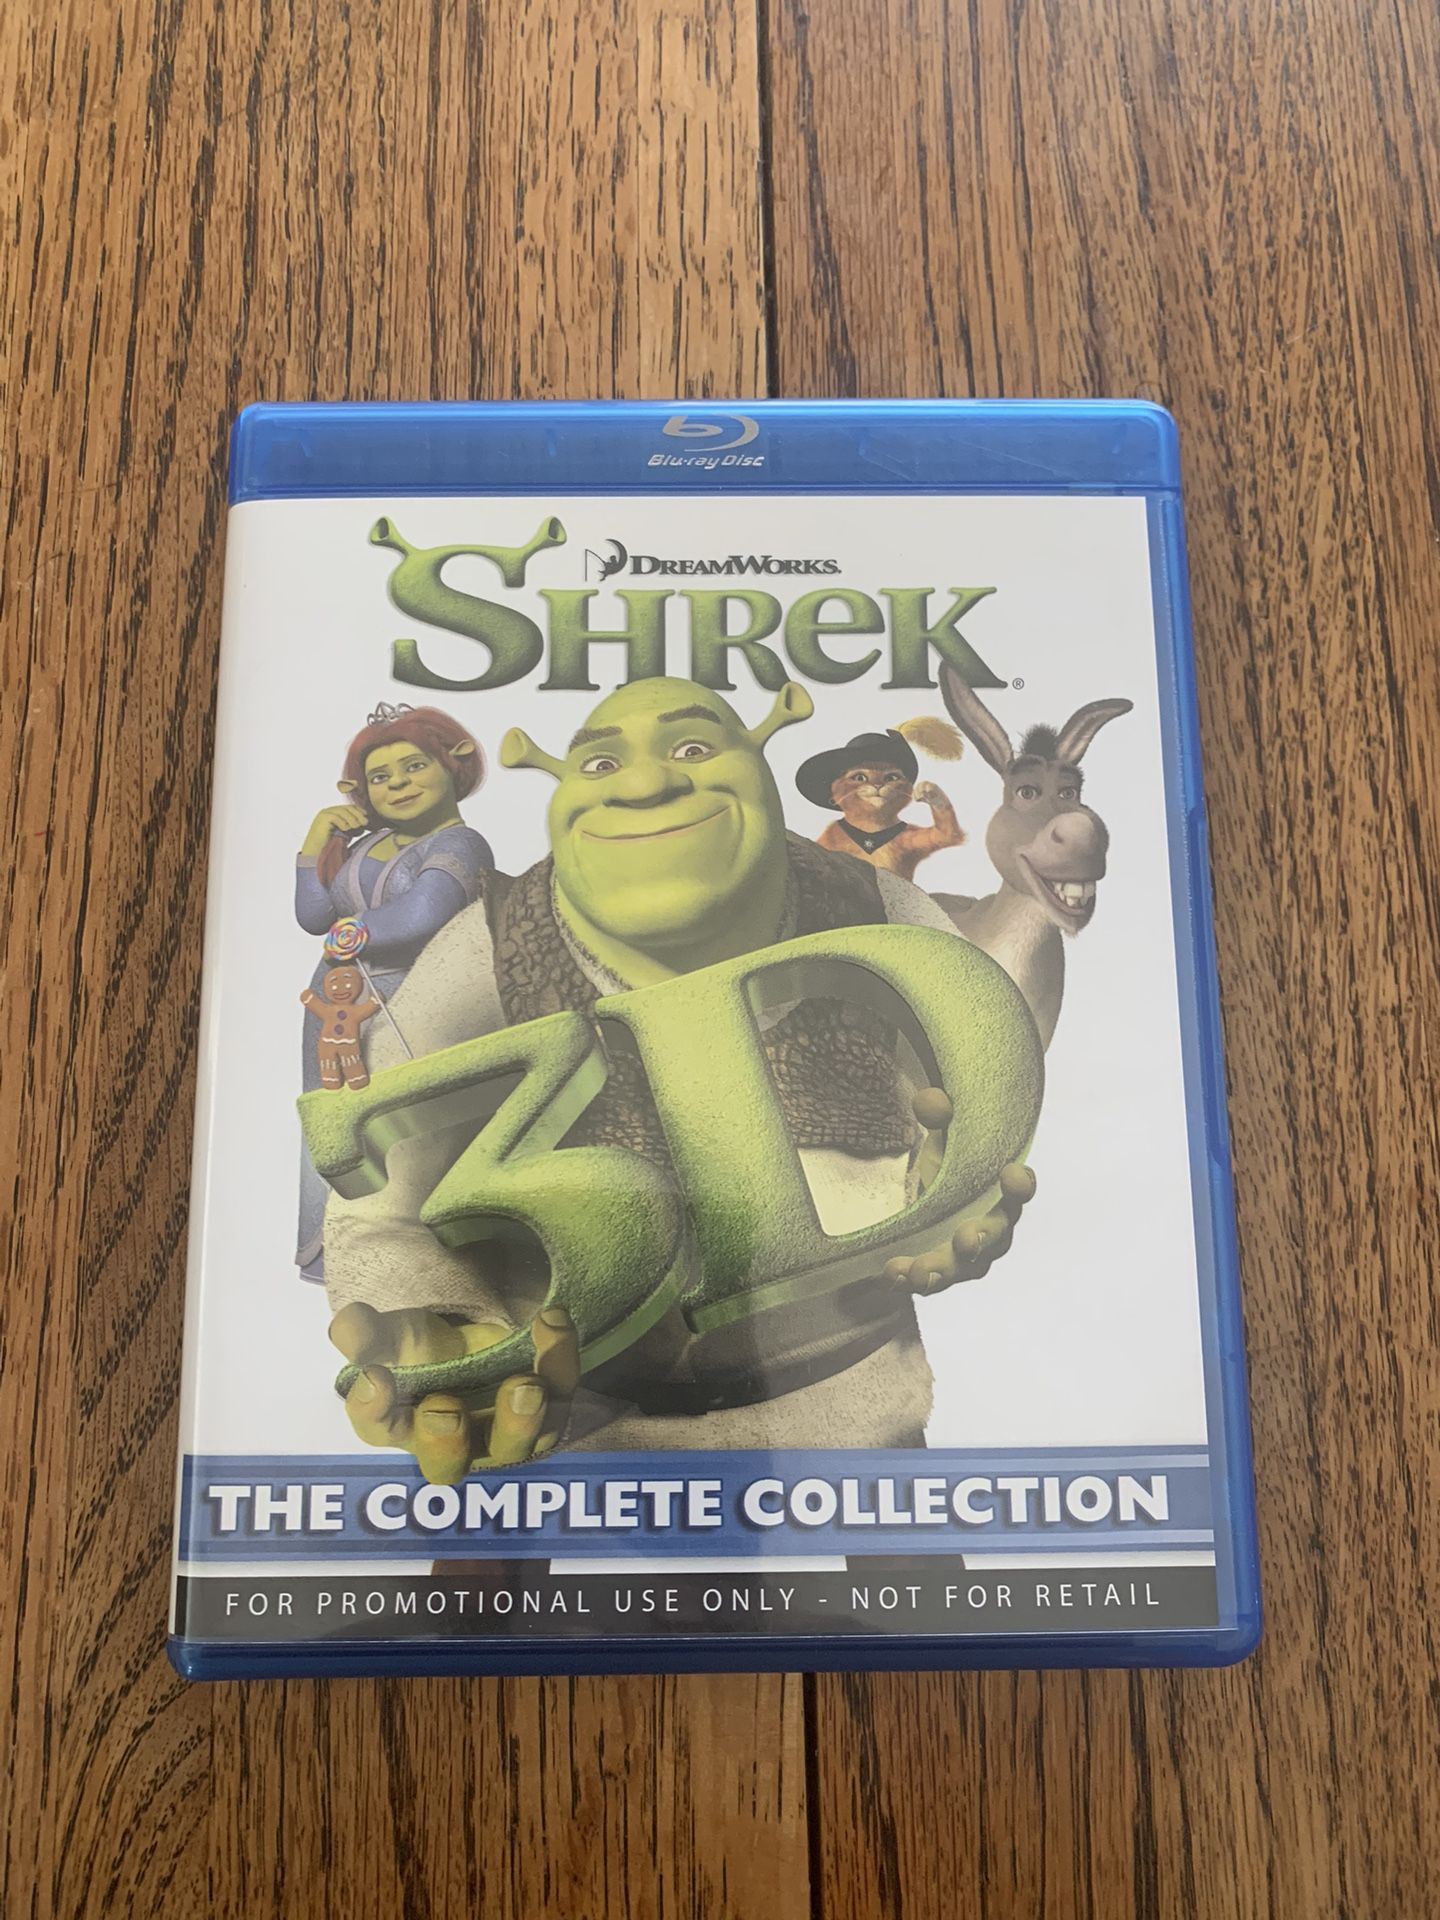 Blu-ray Disc 3-Disc Set, Forever After Shrek 3D DreamWorks The Complete Collection